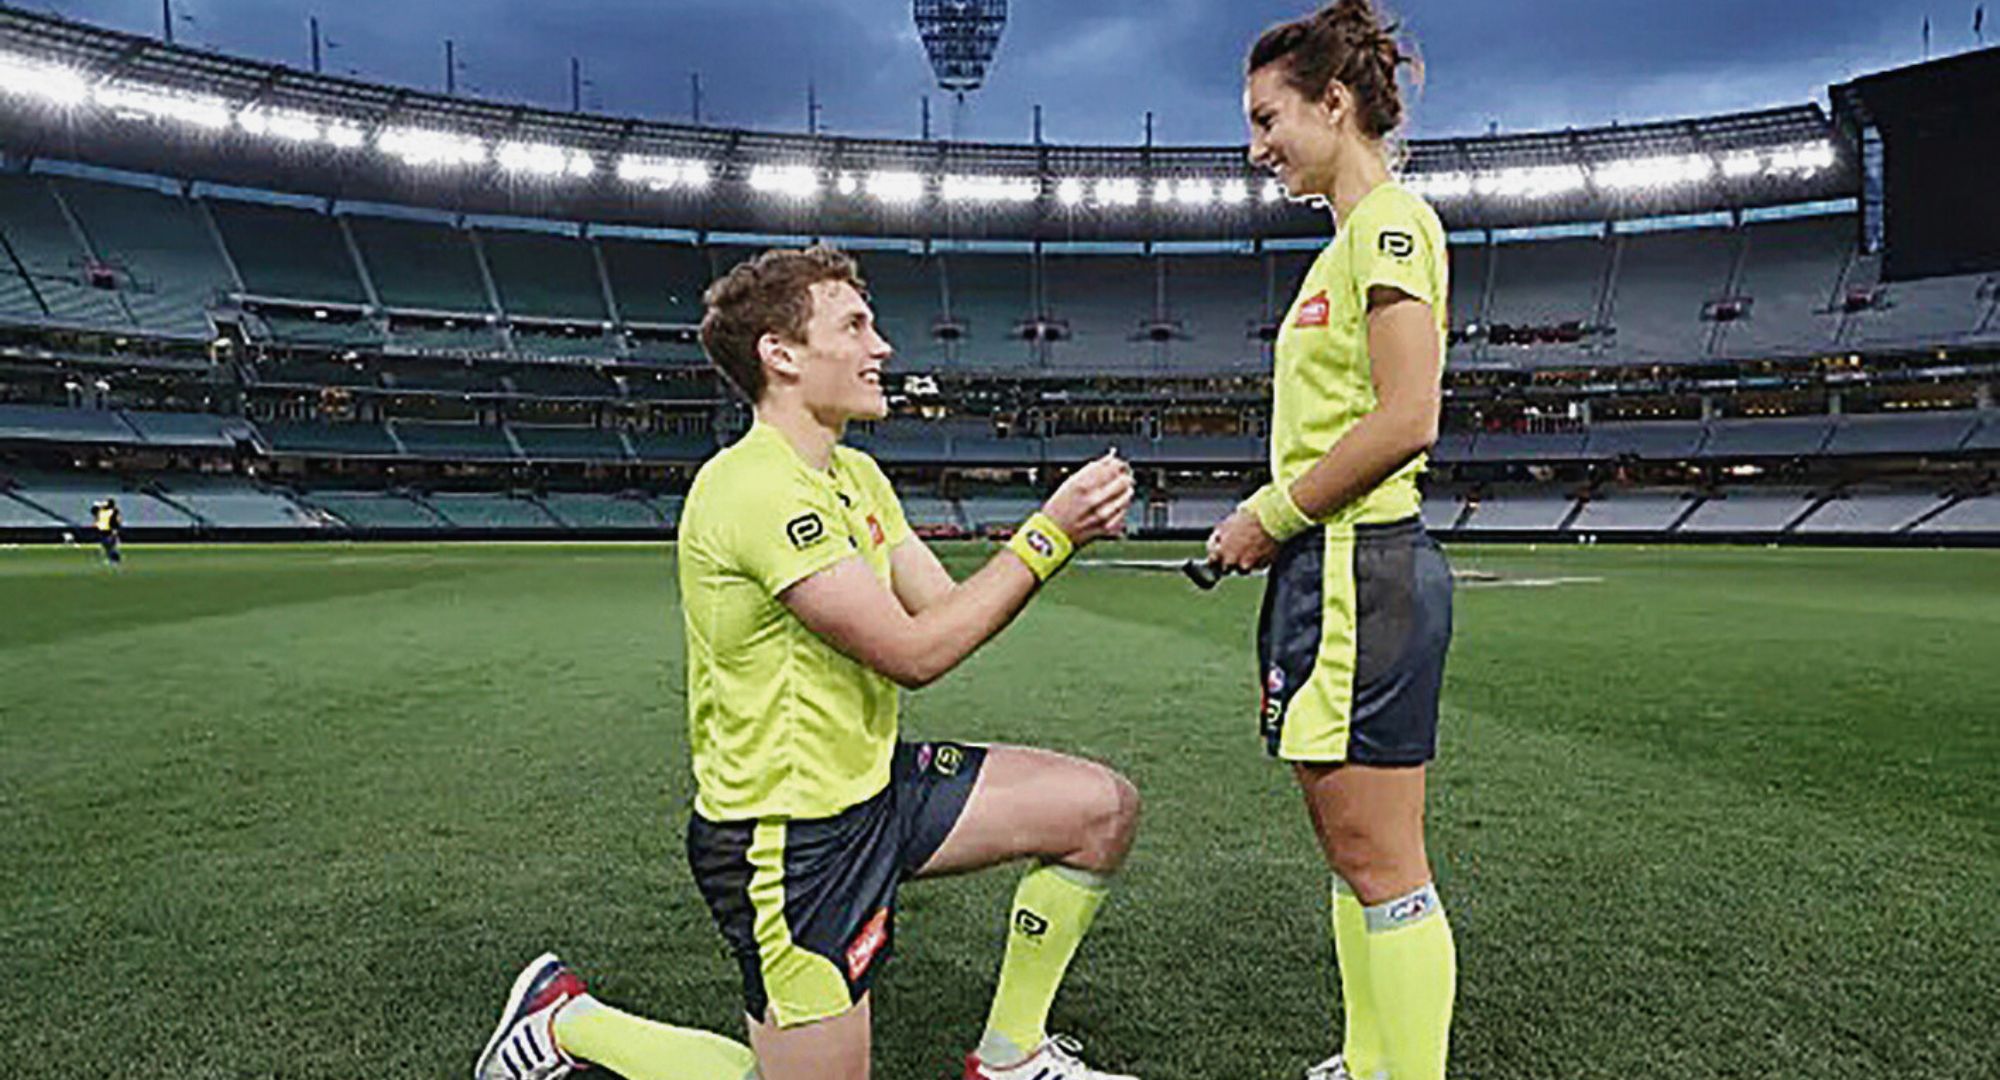 The AFL umpires who got engaged on live TV have a baby on the way!